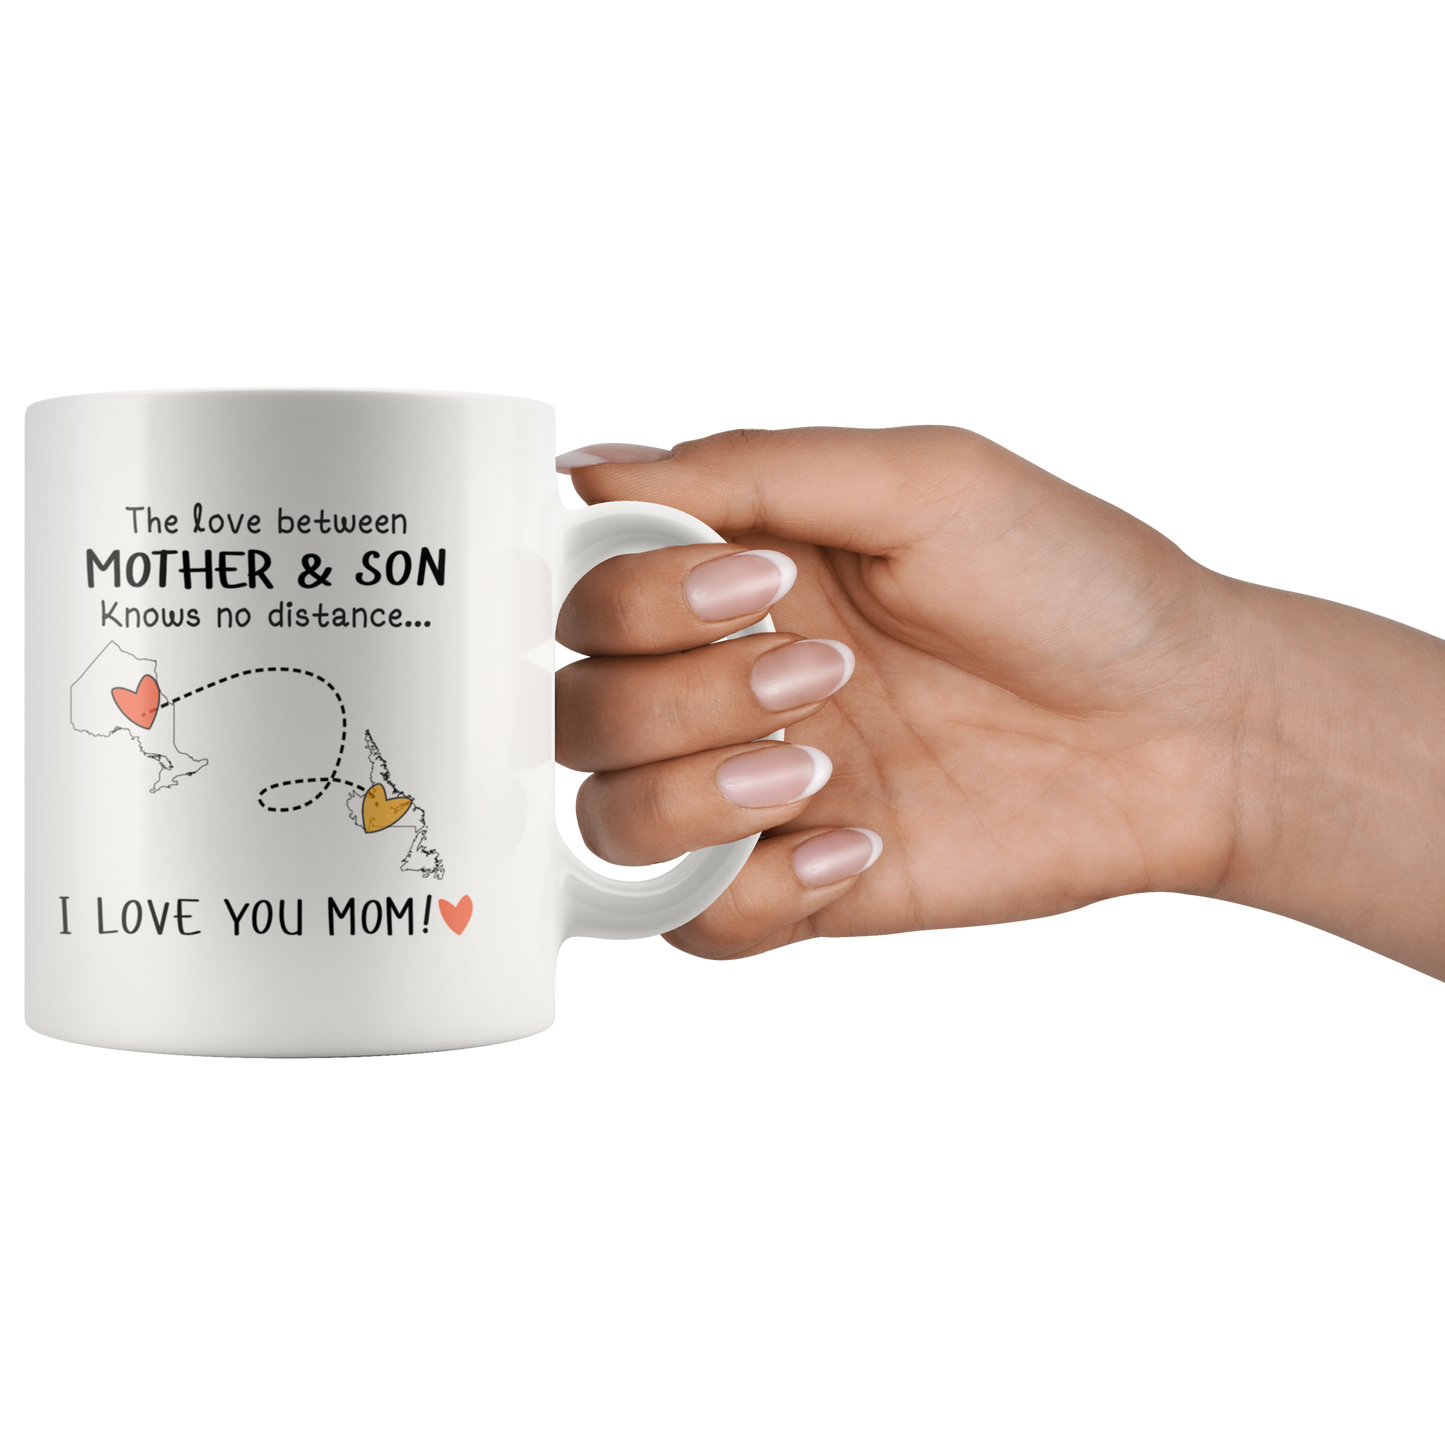 MUG0120569468-sp-19710 - Mothers Day Gifts from Son - The Love Between Mother and So